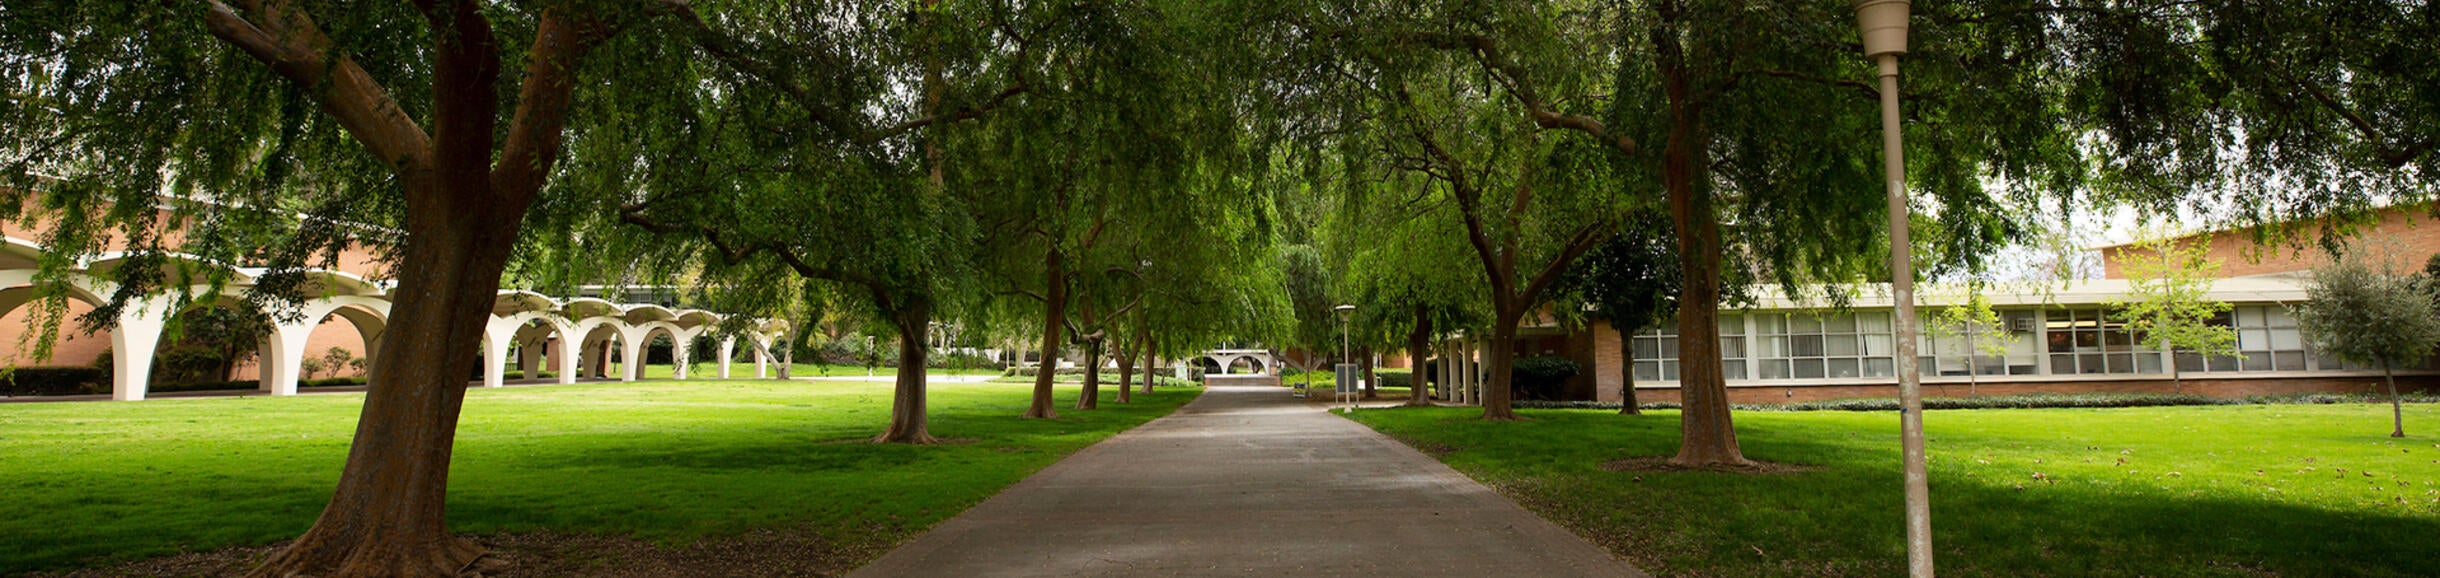 Rivera arches and green trees (c) UCR/Stan Lim